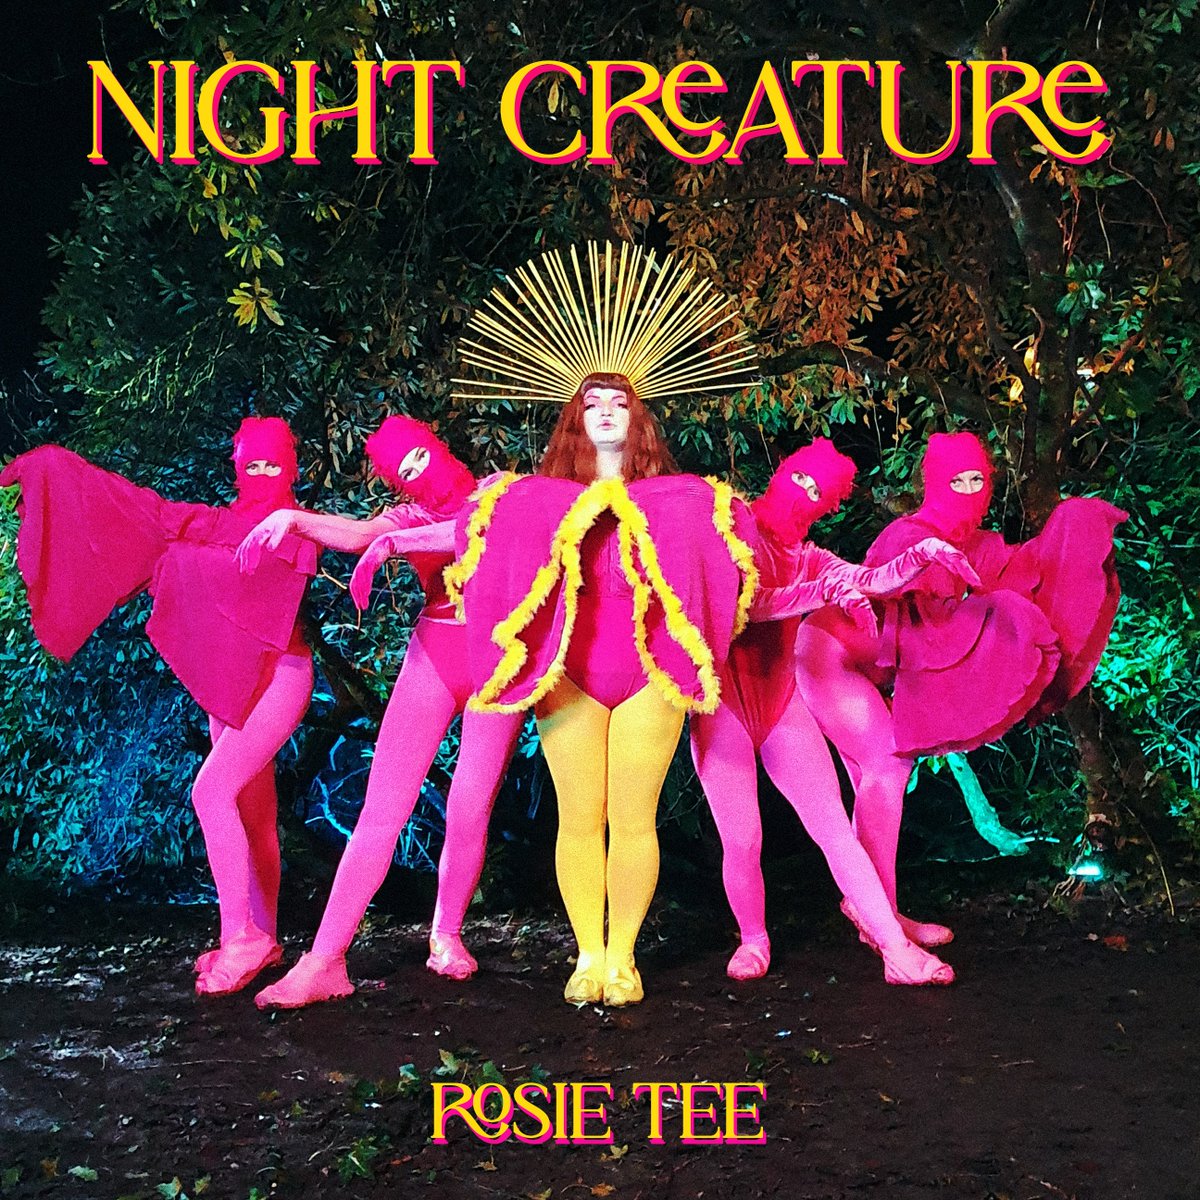 it's unleashed! the new single 'Night Creature' is out today! 🦋💫 Listen here - it's like you're at a party in a remote forest... bit.ly/RT_NCsingle 🎧 Catch you over on YouTube at *midday* for the music video premiere!! youtu.be/p4hZ9wjai7Q 📽️